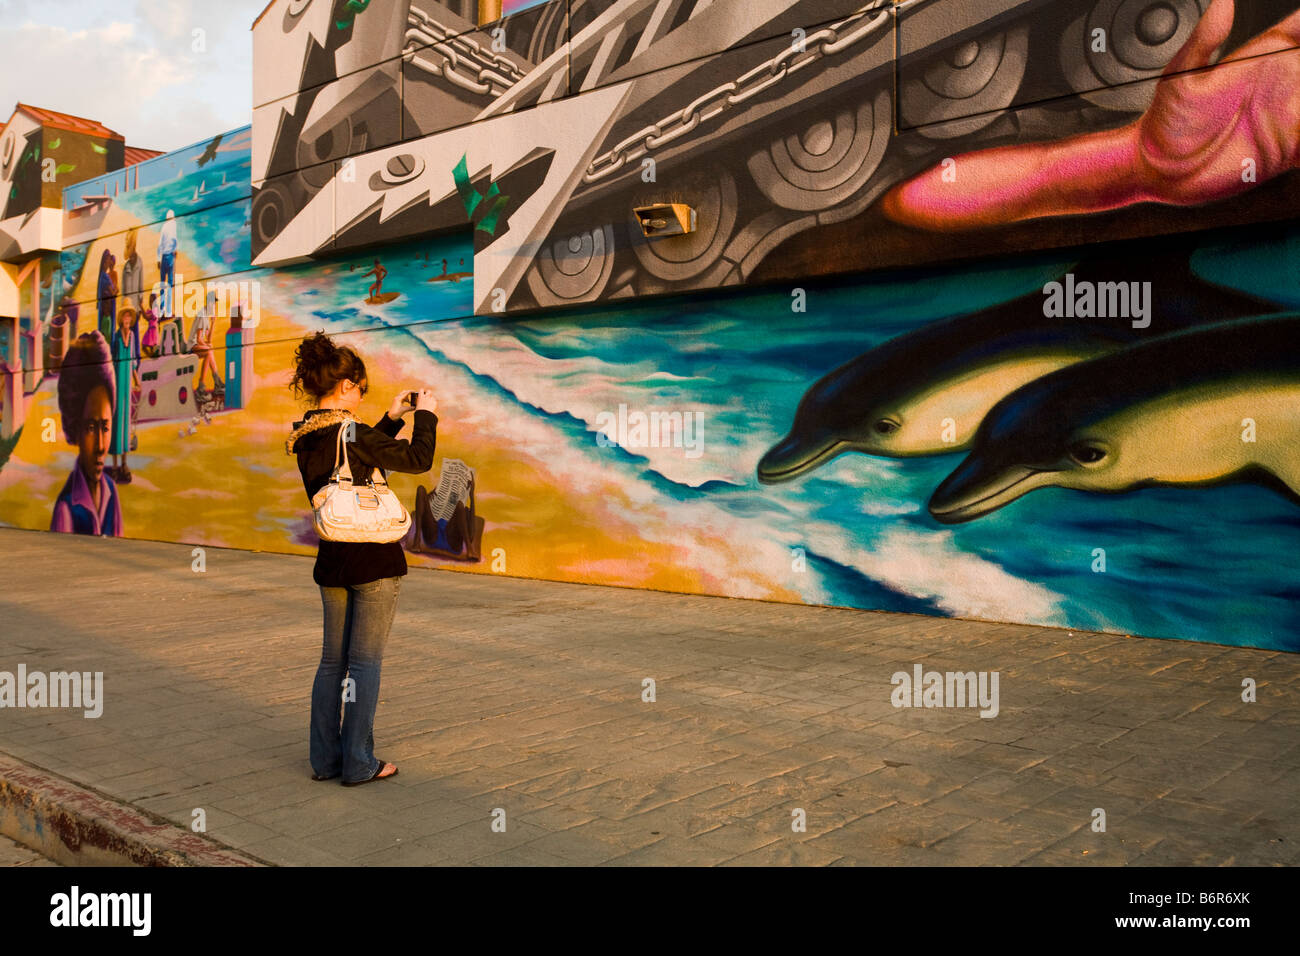 Toursit takes a photo of a mural Venice Beach Los Angeles County California United States of America Stock Photo